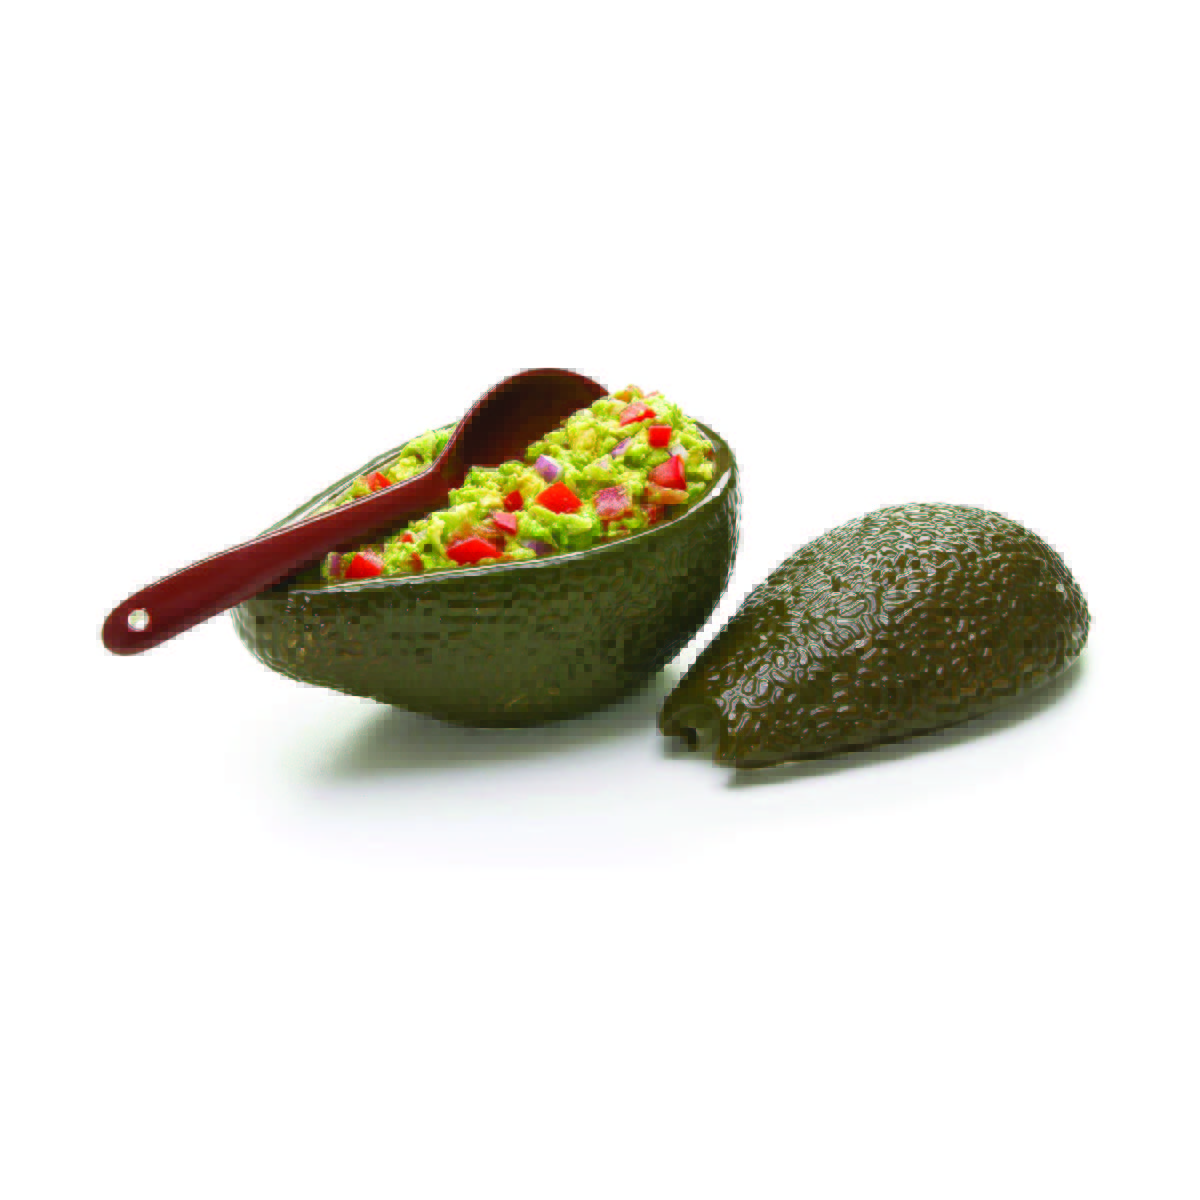 A ceramic bowl that looks like an avocado filled with guacamole with a spoon inside and a lid on the side.